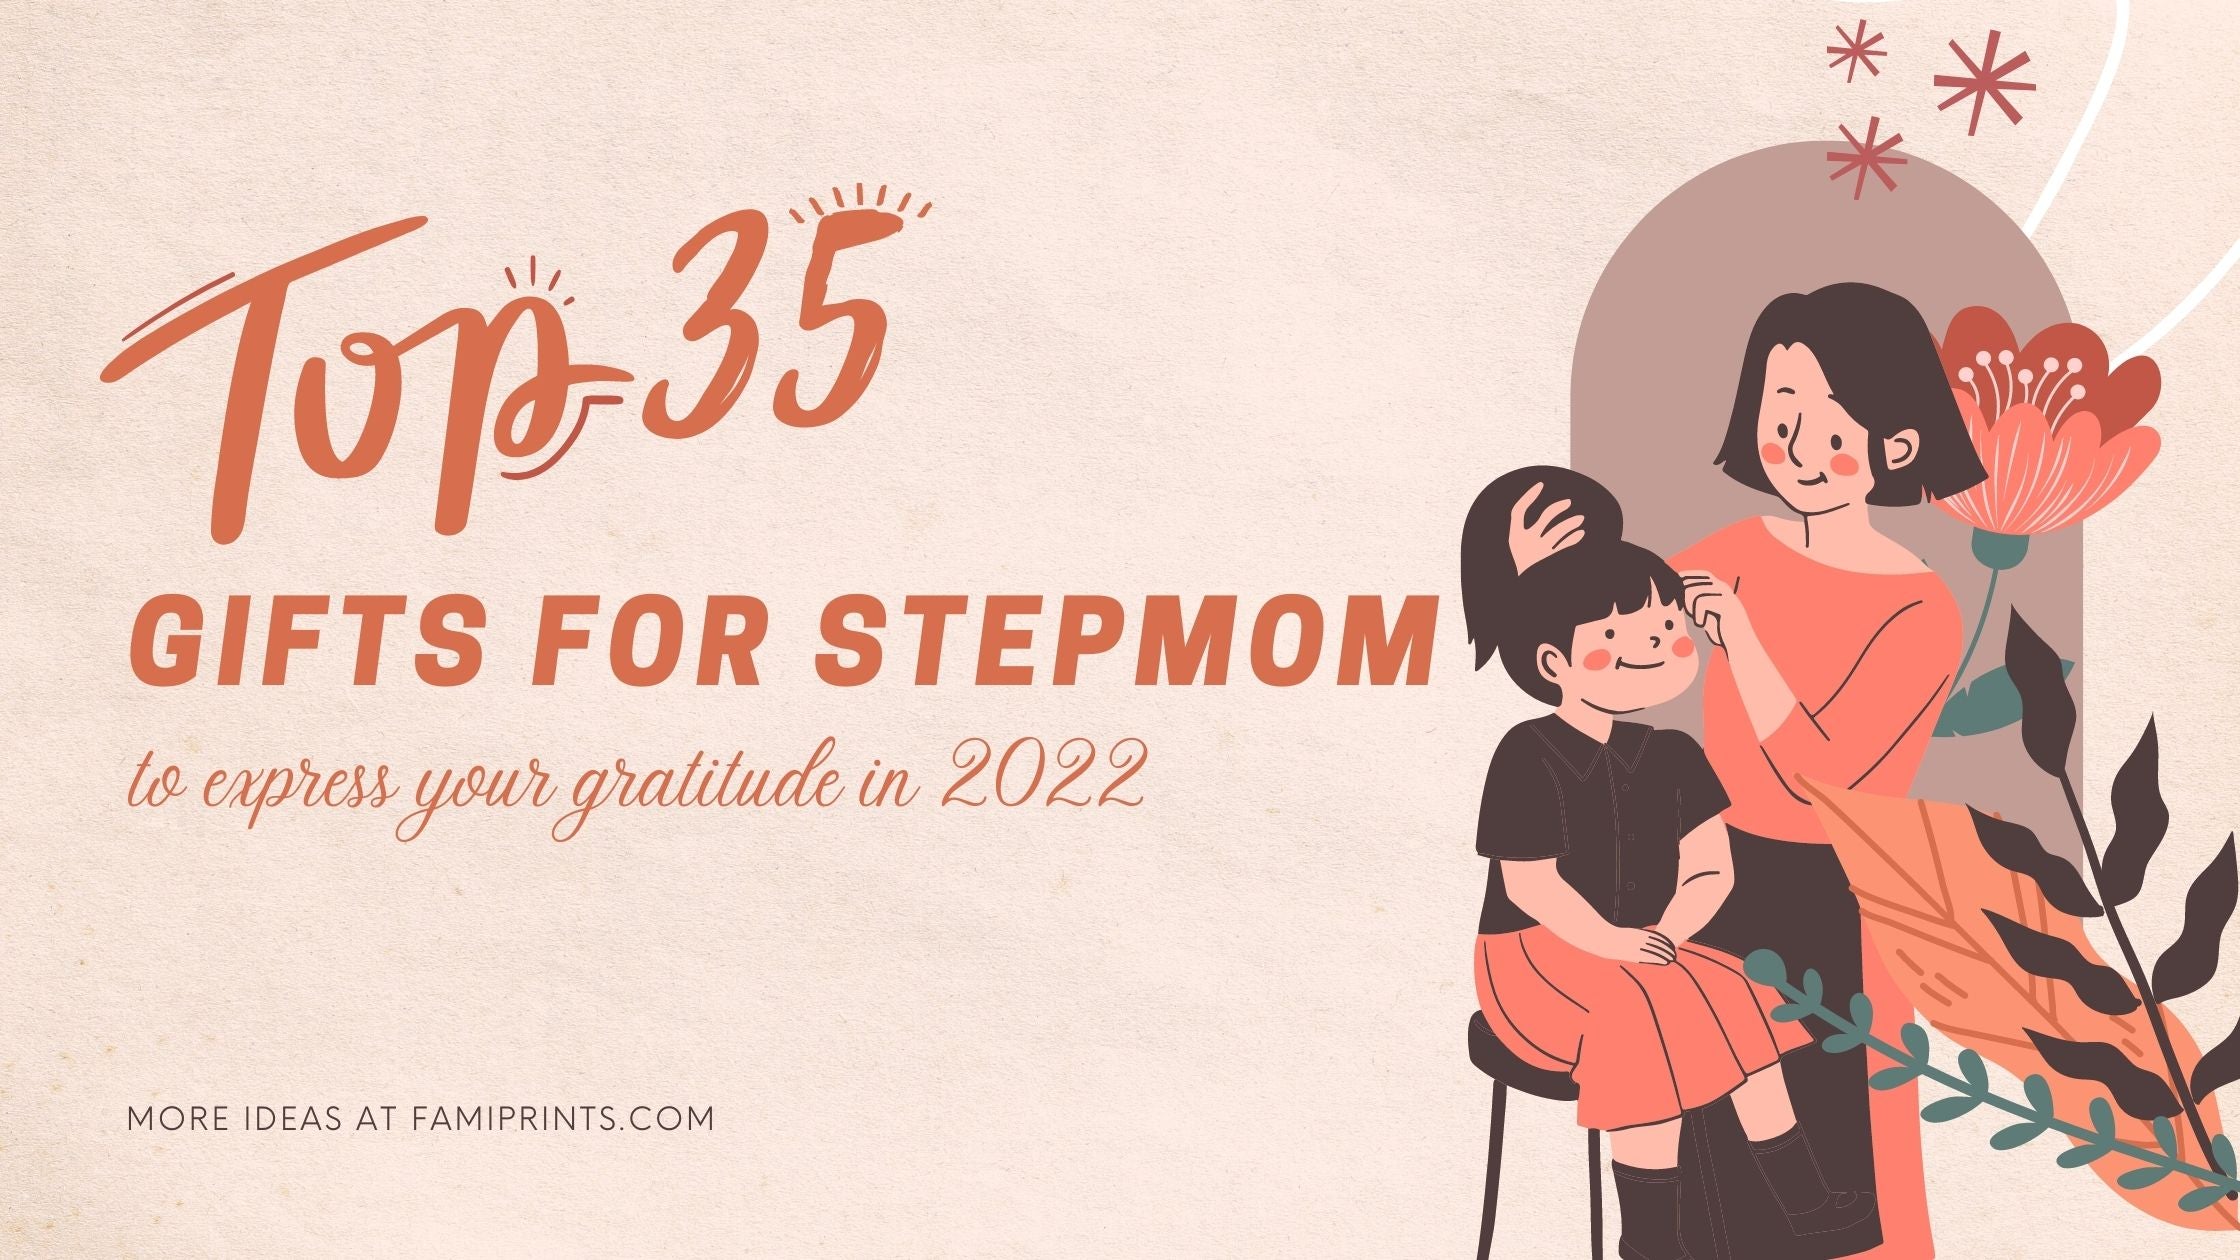 Top 35 Gifts For Stepmom To Express Your Gratitude In 2022 - FamiPrints | Trending Customizable Family Gifts